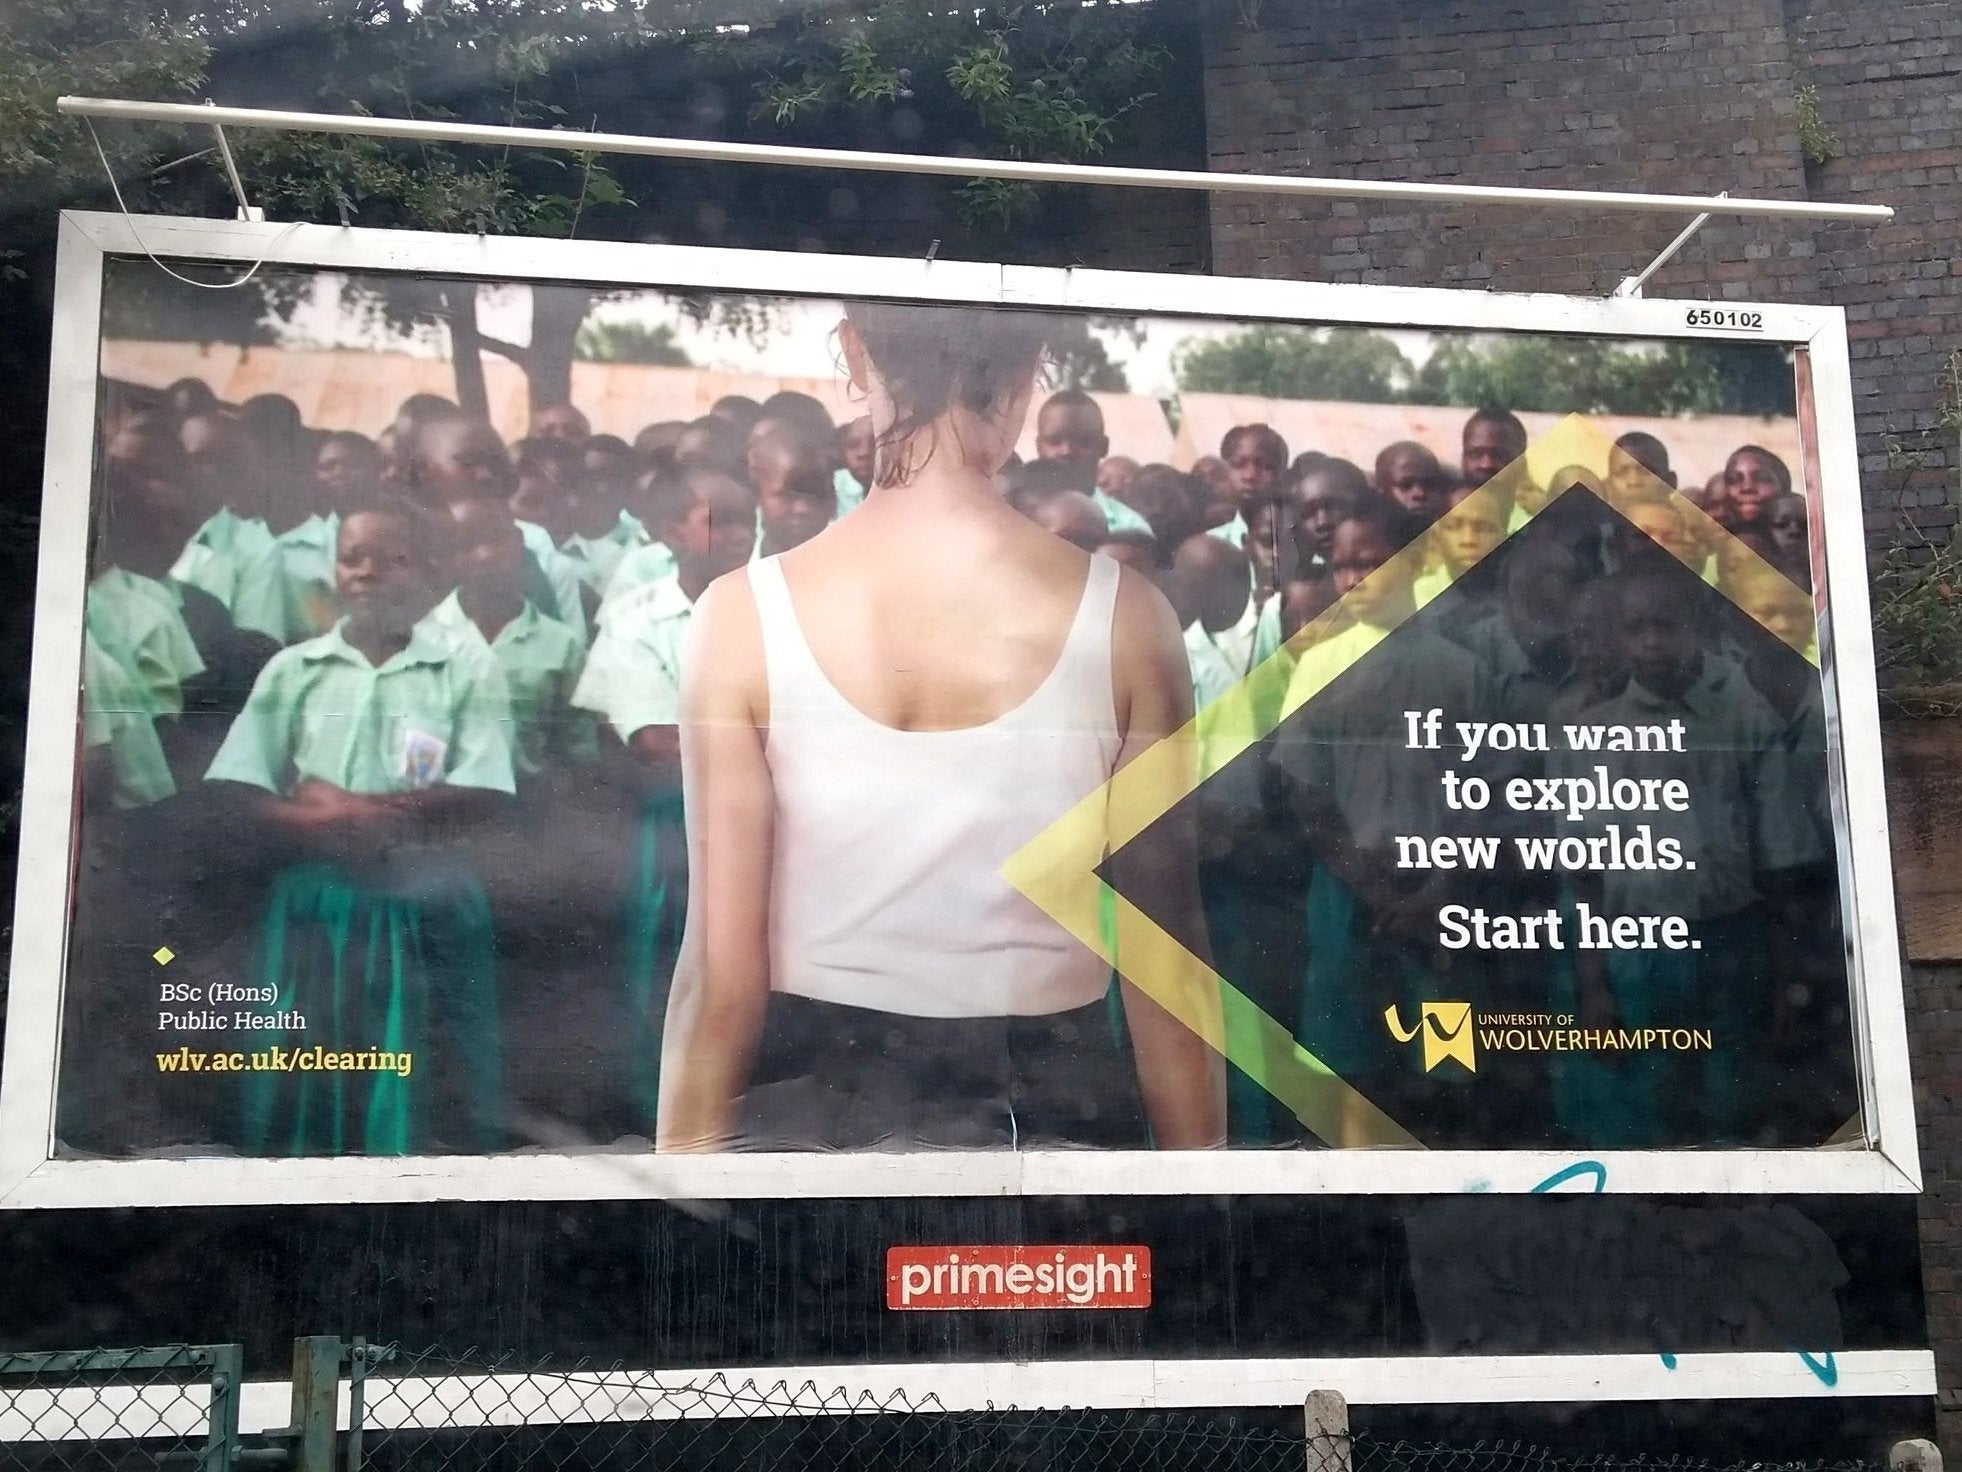 The billboard, which was aimed at promoting a public health course, has been withdrawn by the University of Wolverhampton.